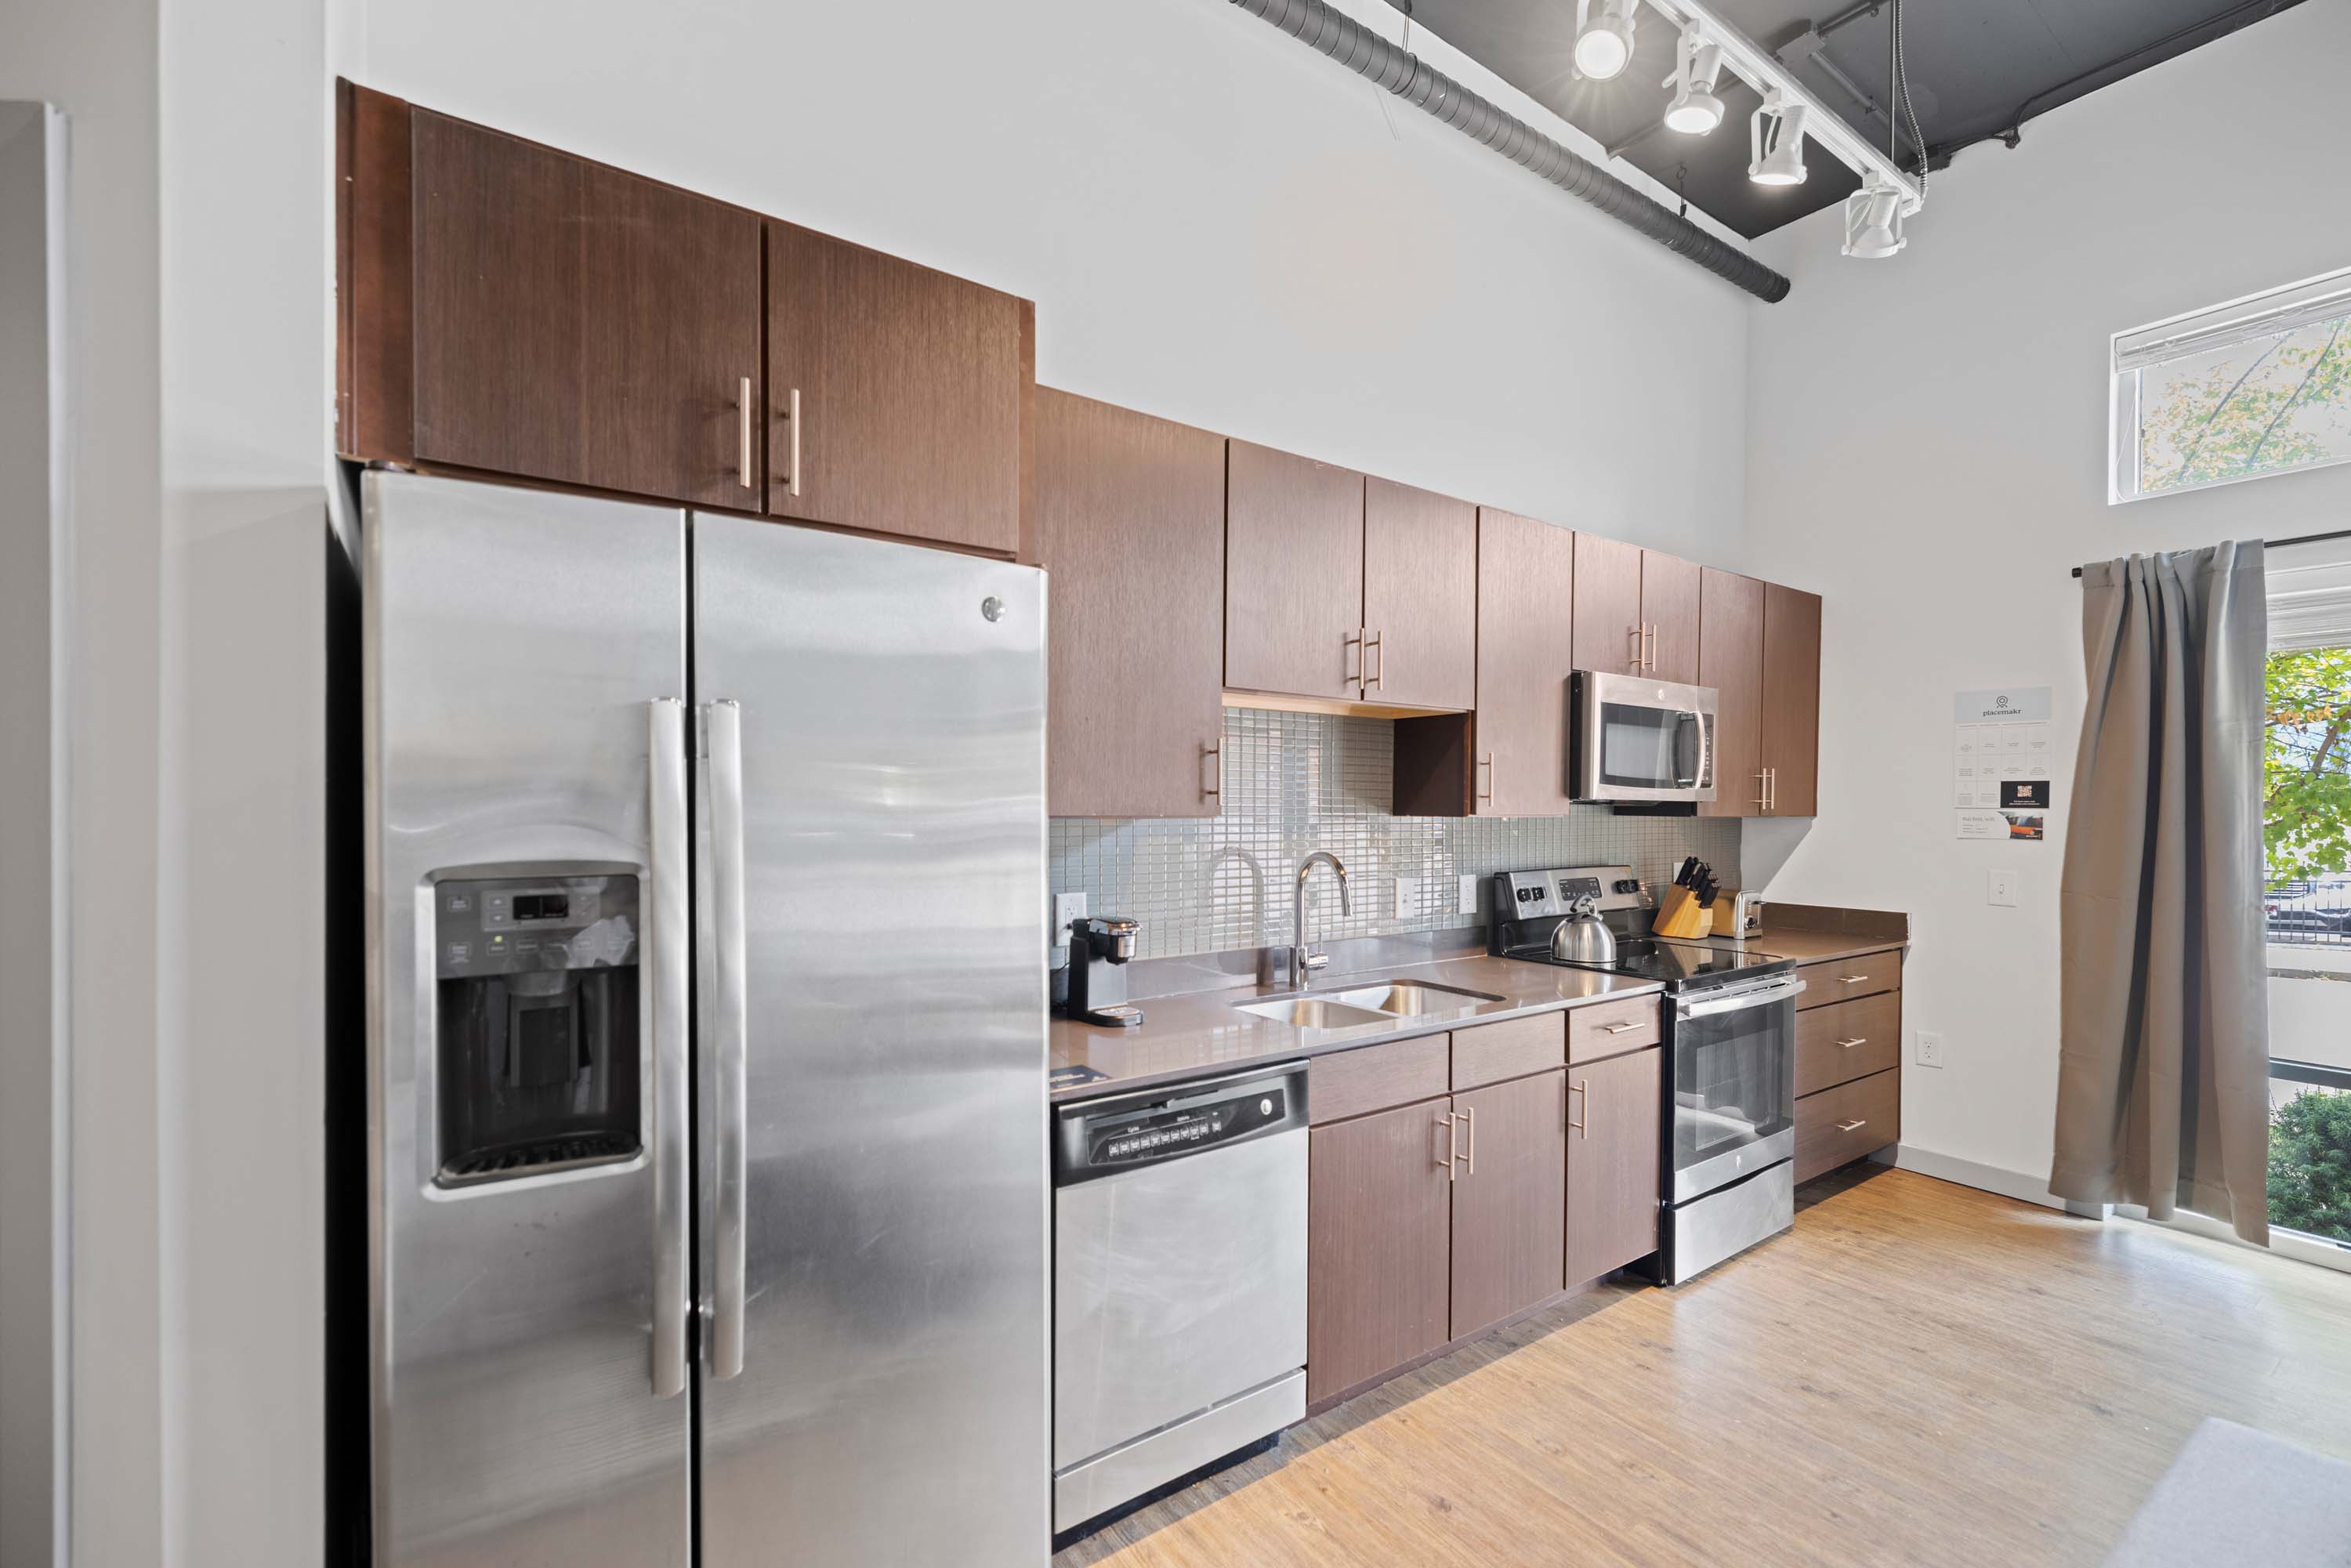 Full-equipped kitchen with full size appliances.